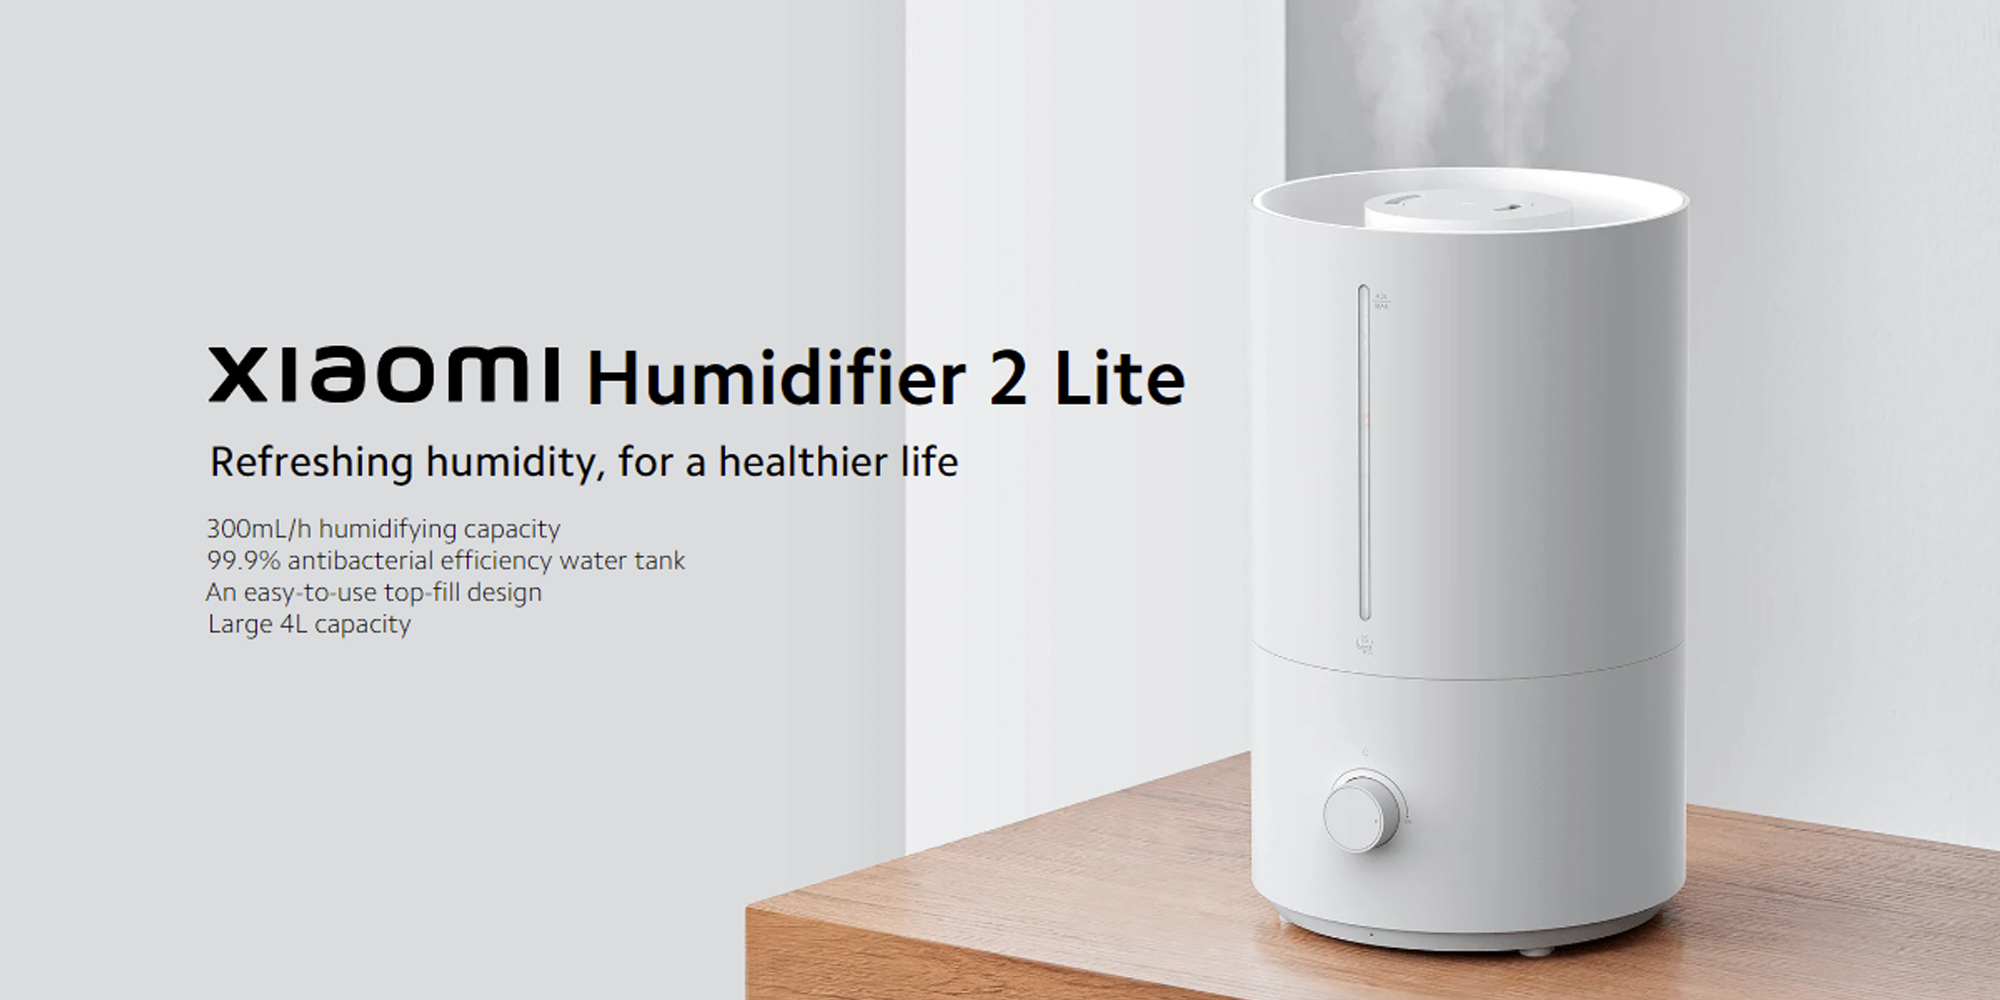 Xiaomi Humidifier 2 Lite with 4L Water Tank - 6934177799785 - A+ content